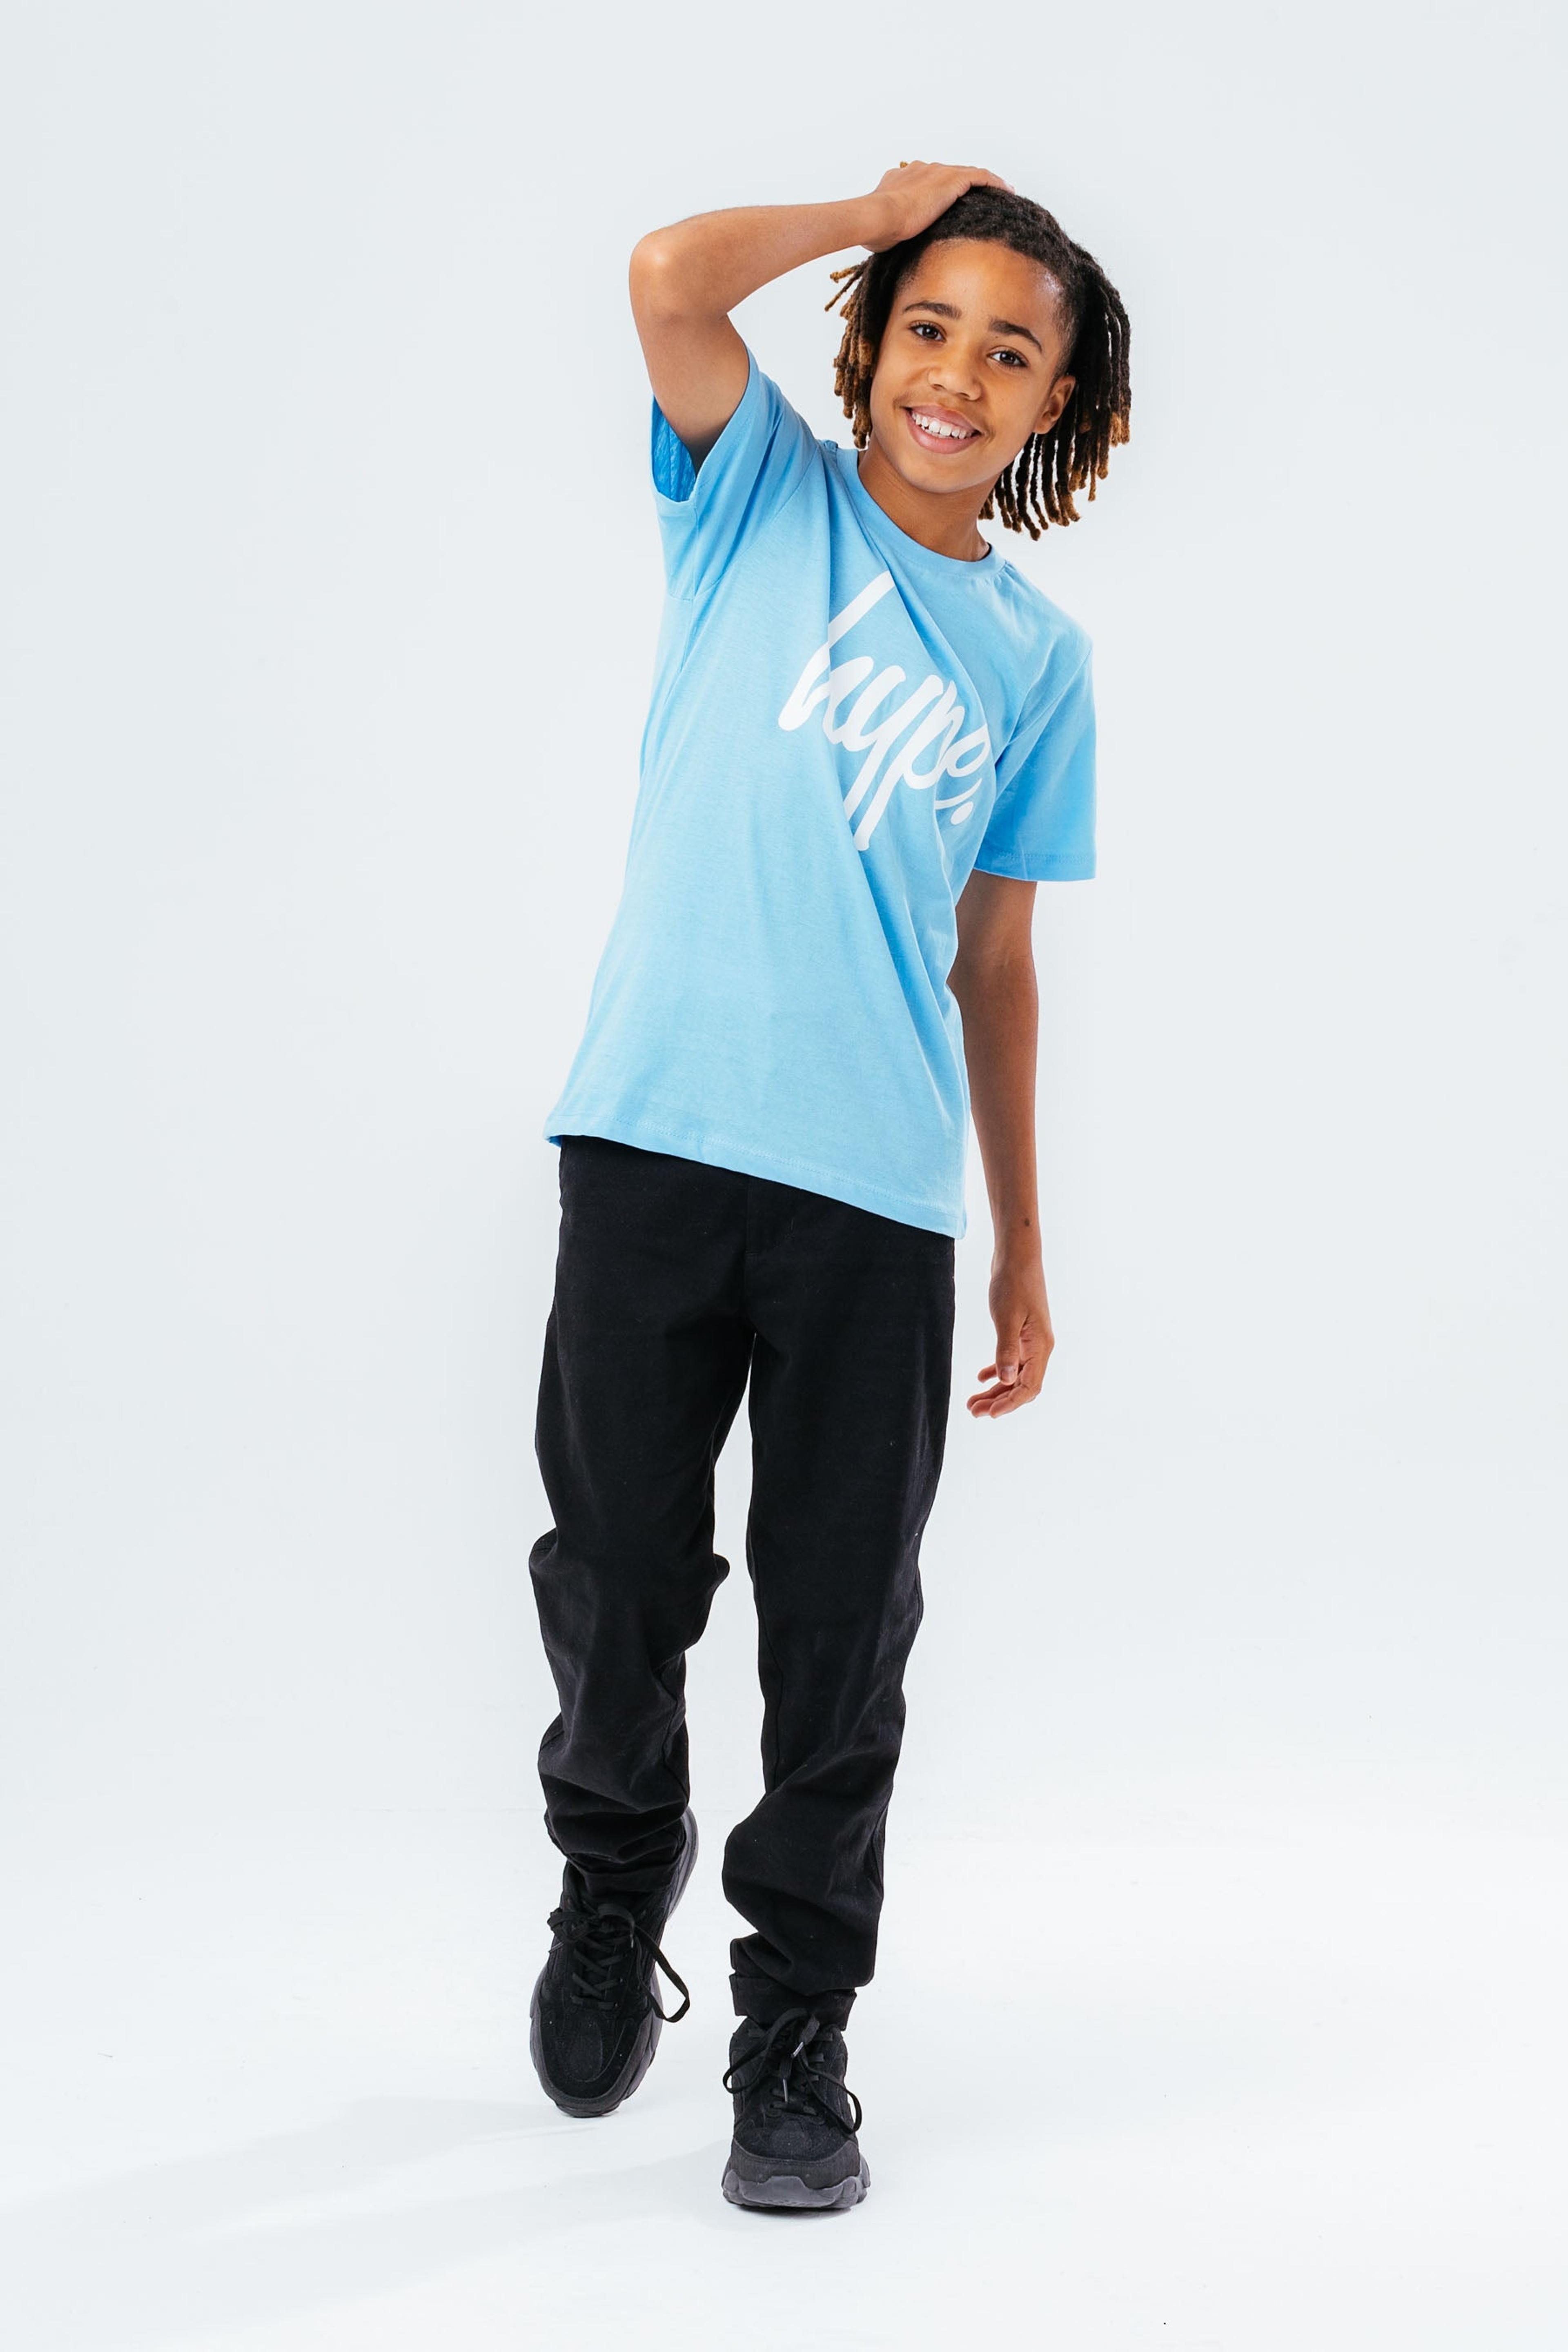 Alternate View 1 of HYPE WASHED BABY BLUE SCRIPT LOGO KIDS  T-SHIRT